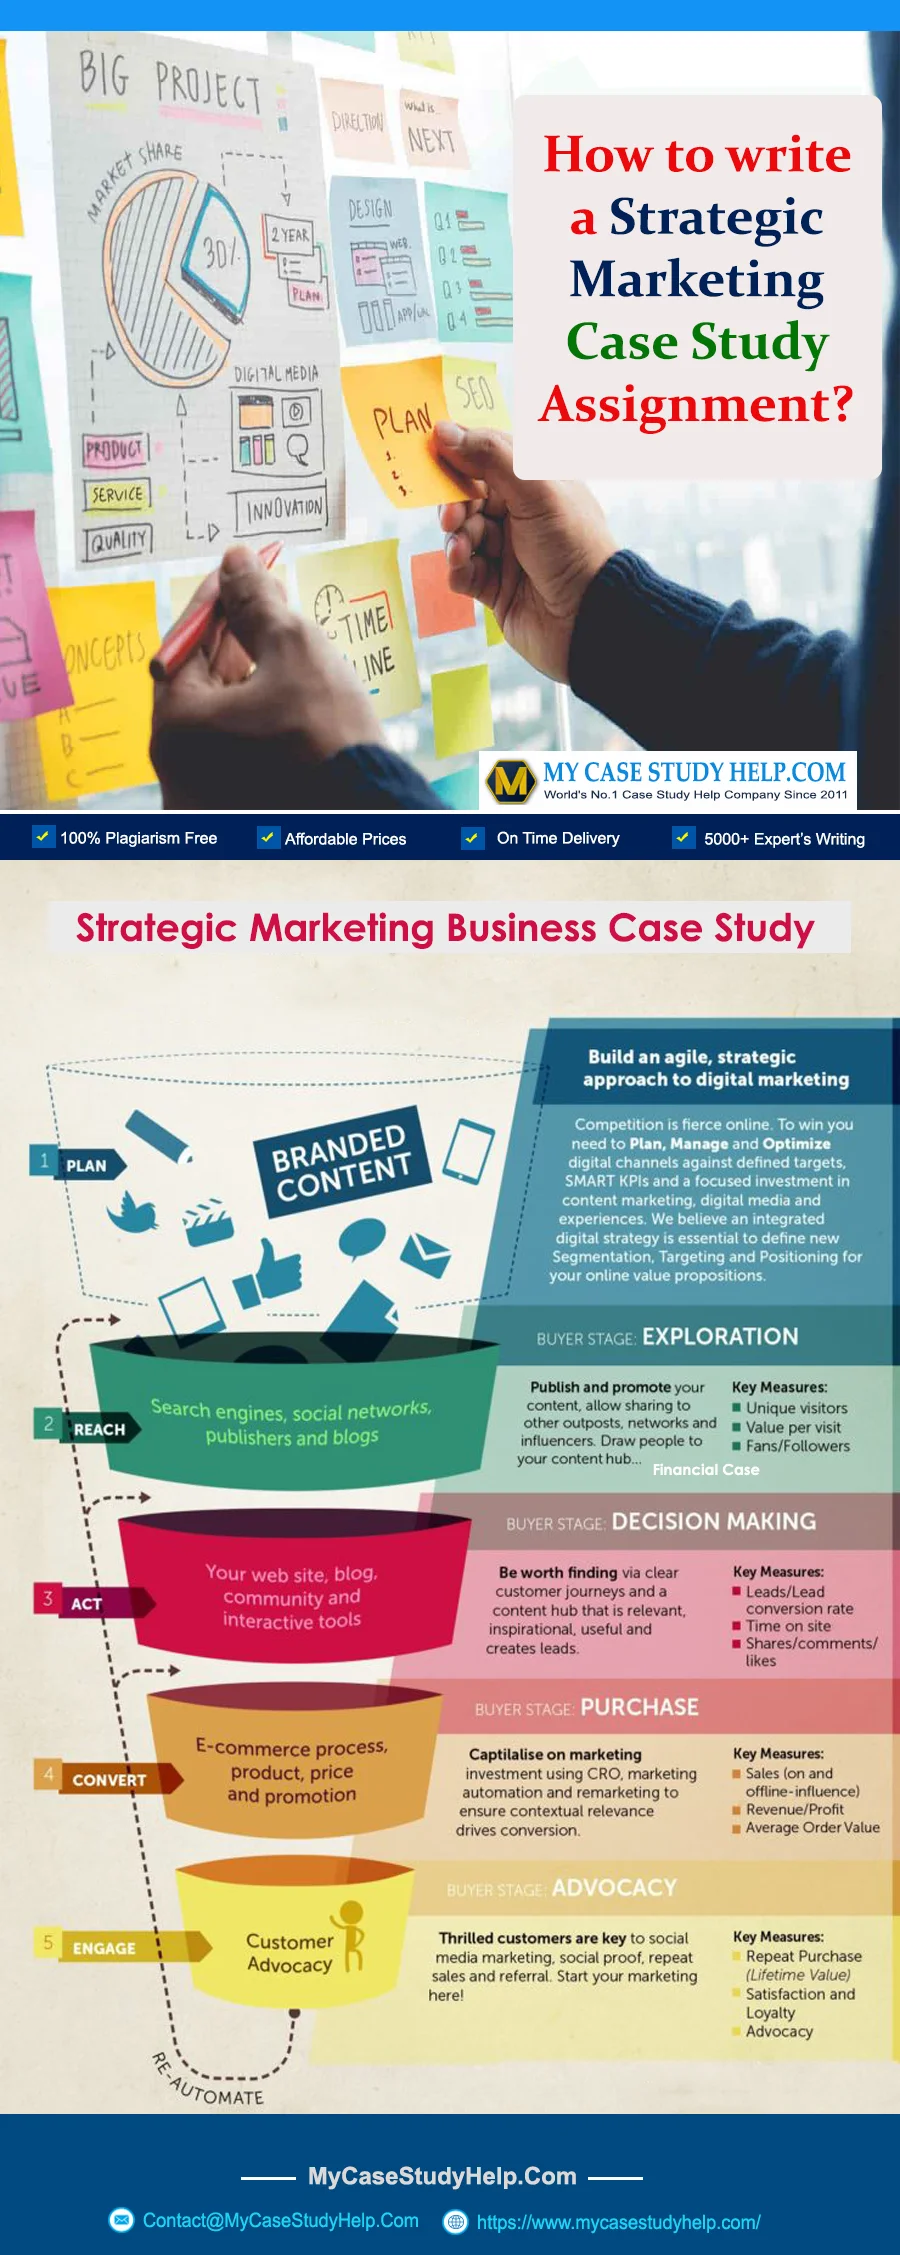 How To Write A Strategic Marketing Case Study Assignment?